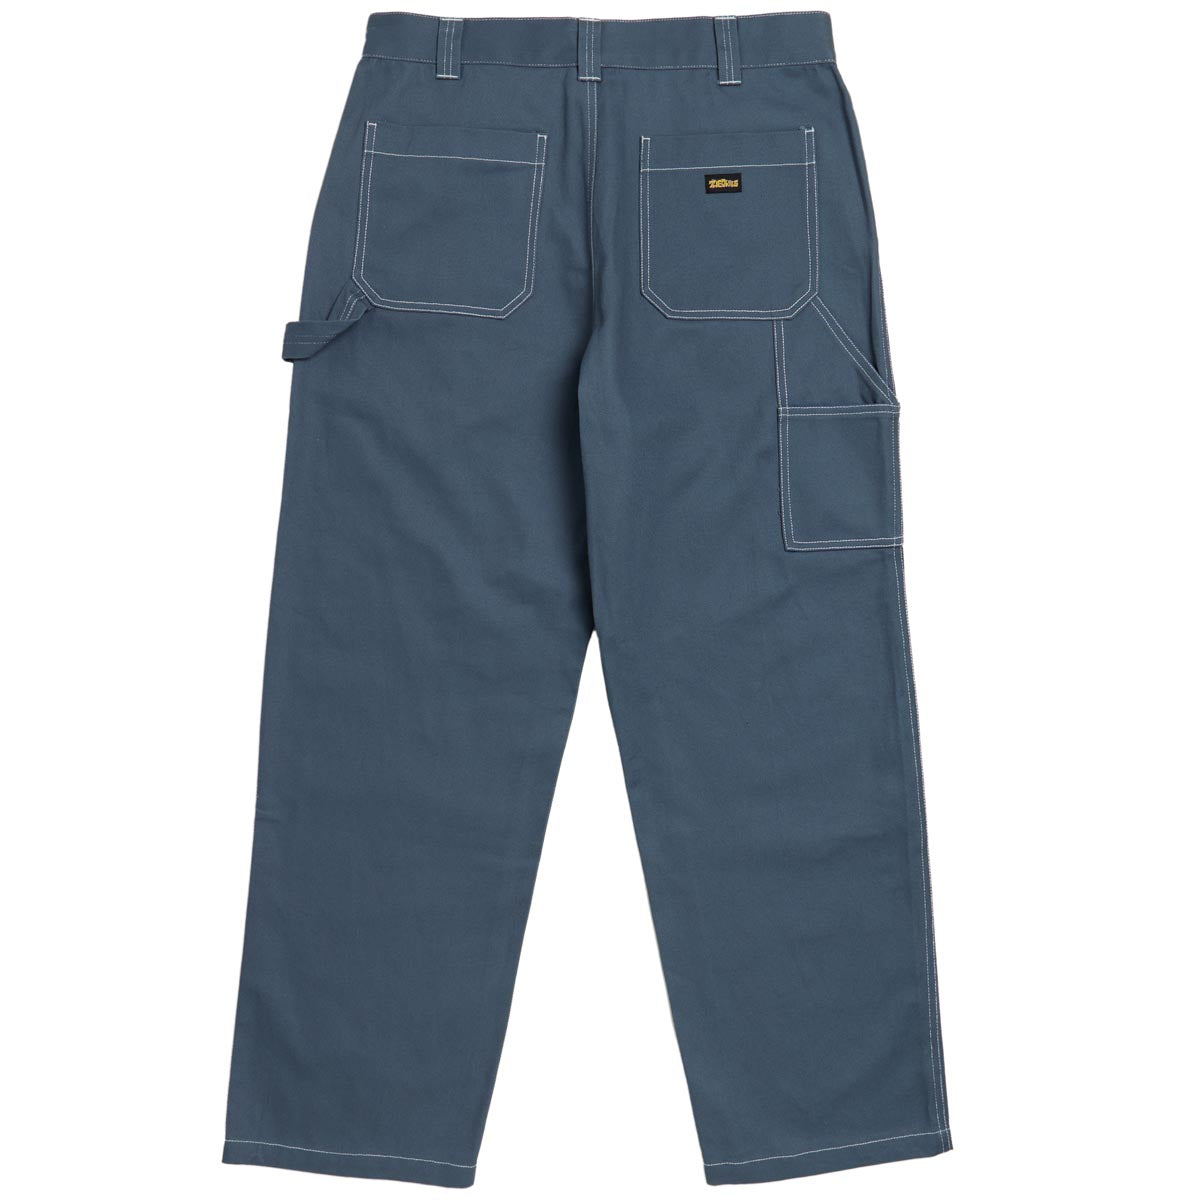 Theories Piano Trap Carpenter Pants - Slate Blue Contrast Stitch image 2